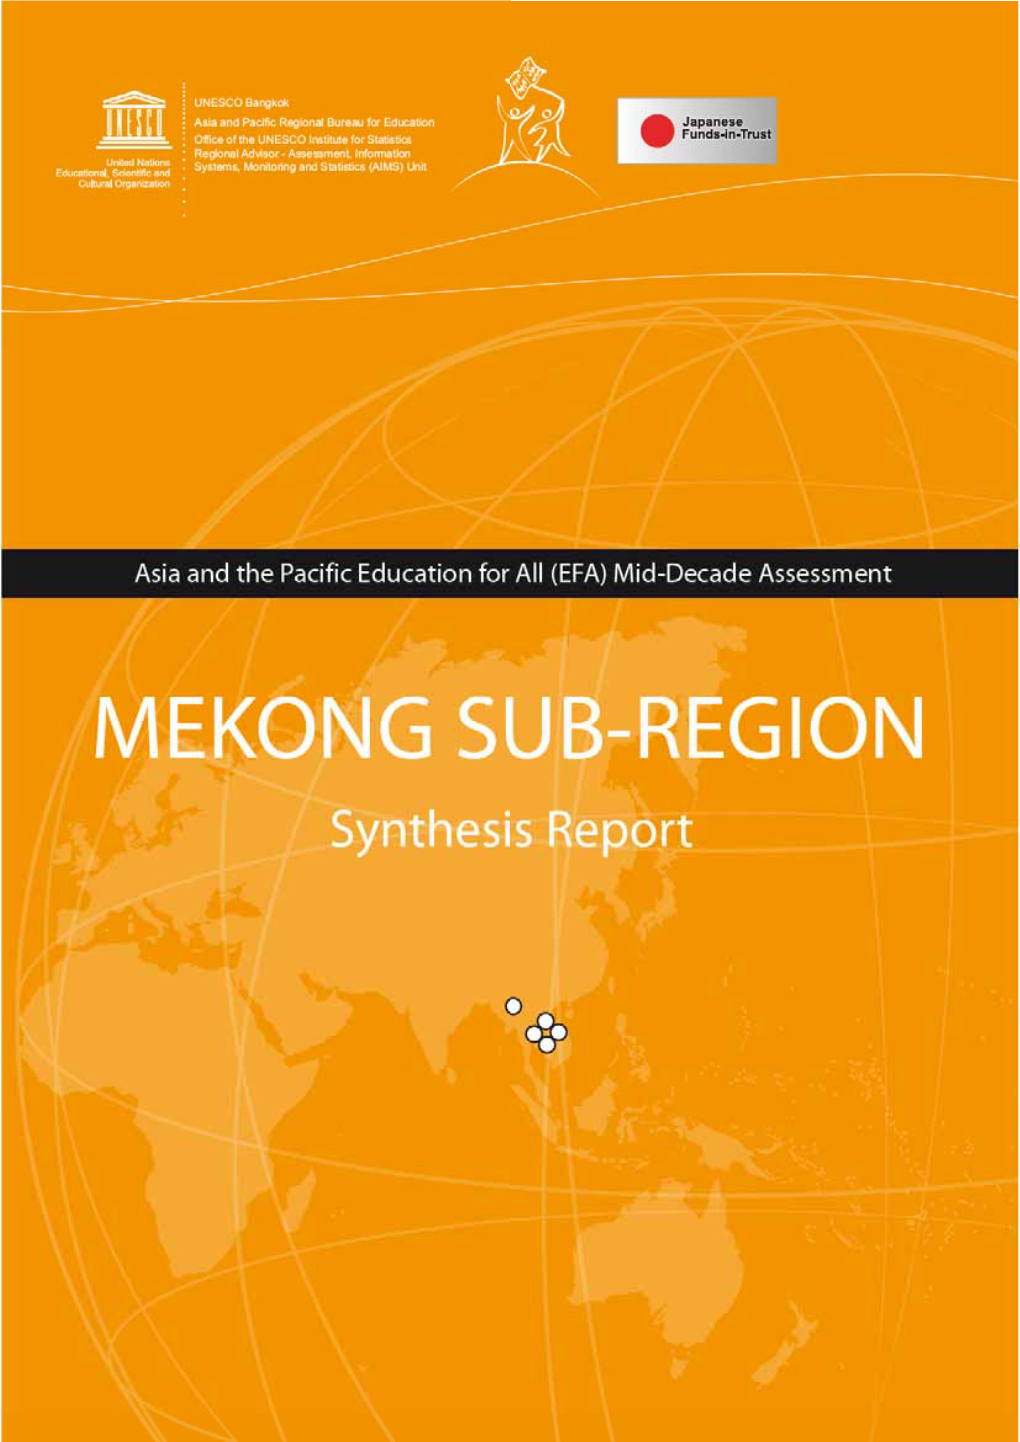 (EFA) Mid-Decade Assessment: Mekong Sub-Region: Synthesis Report